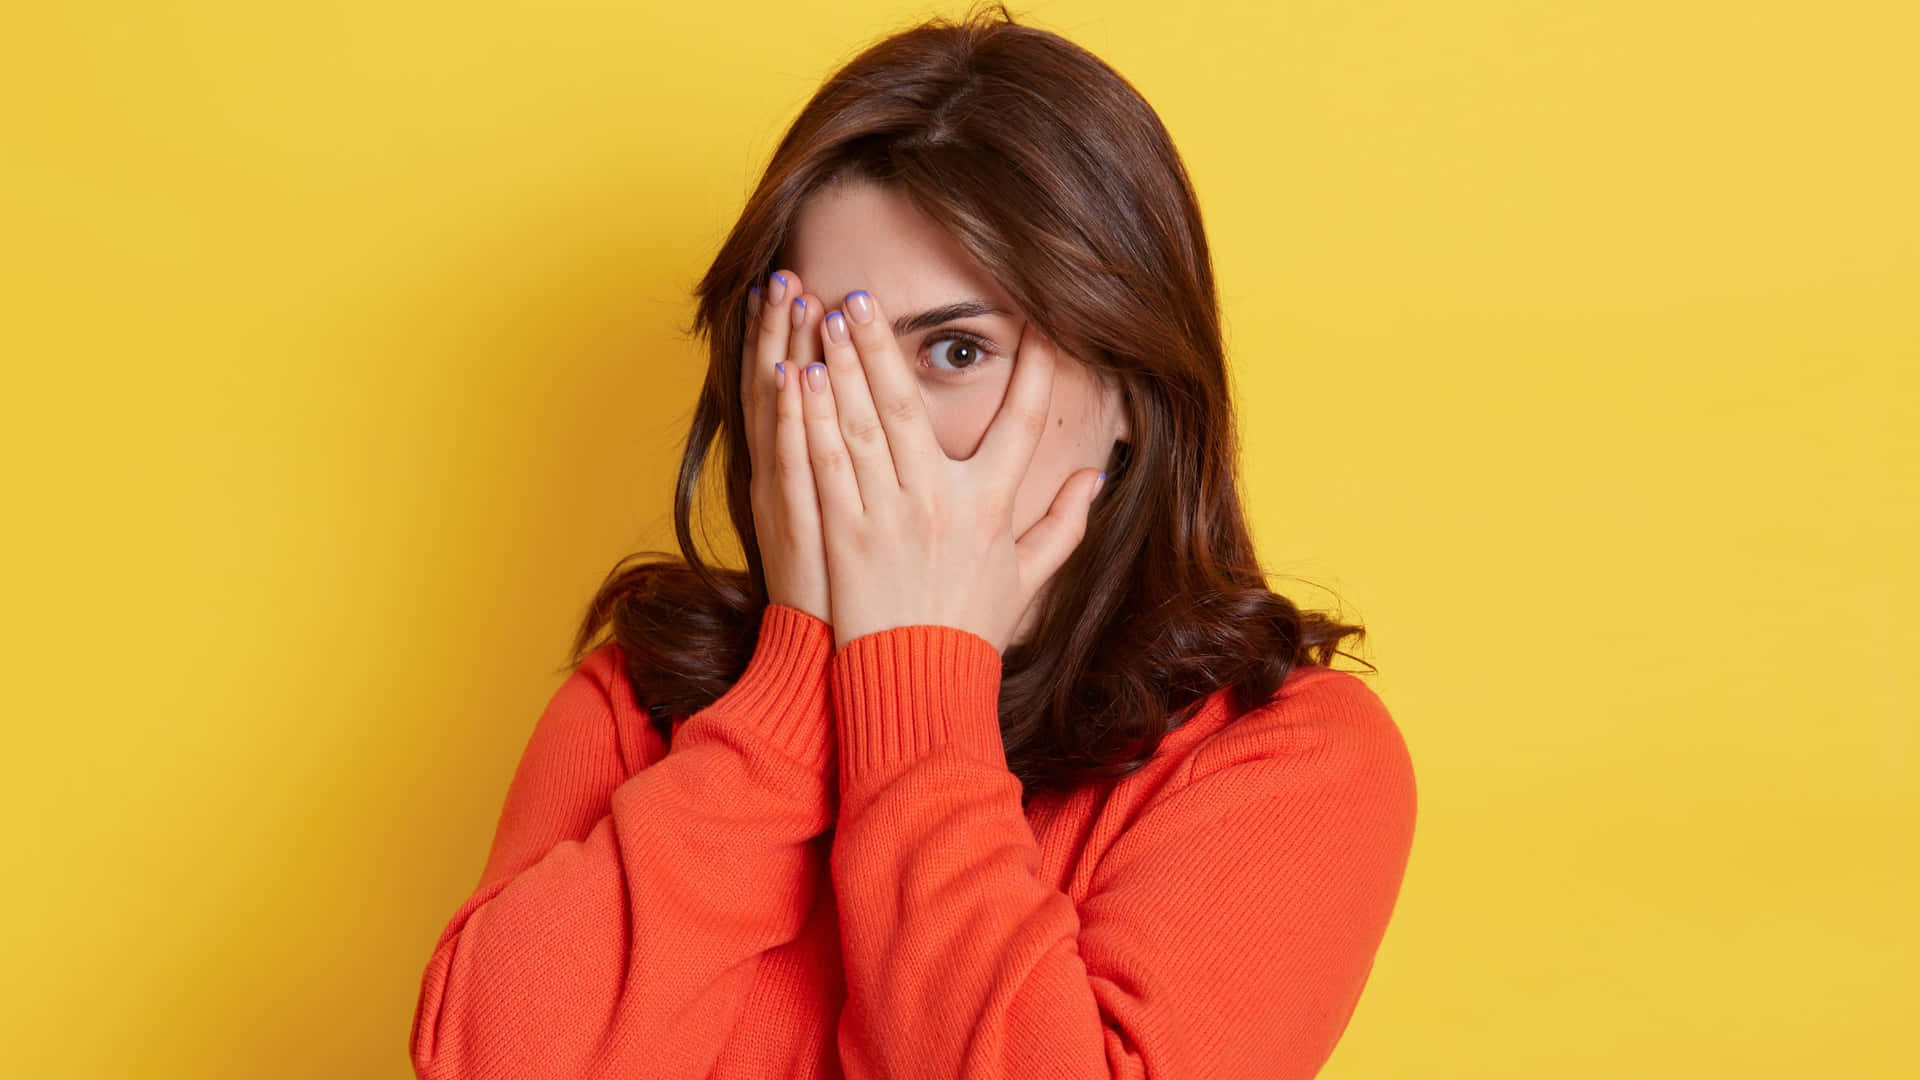 Embarrassed Woman Covering Face Wallpaper